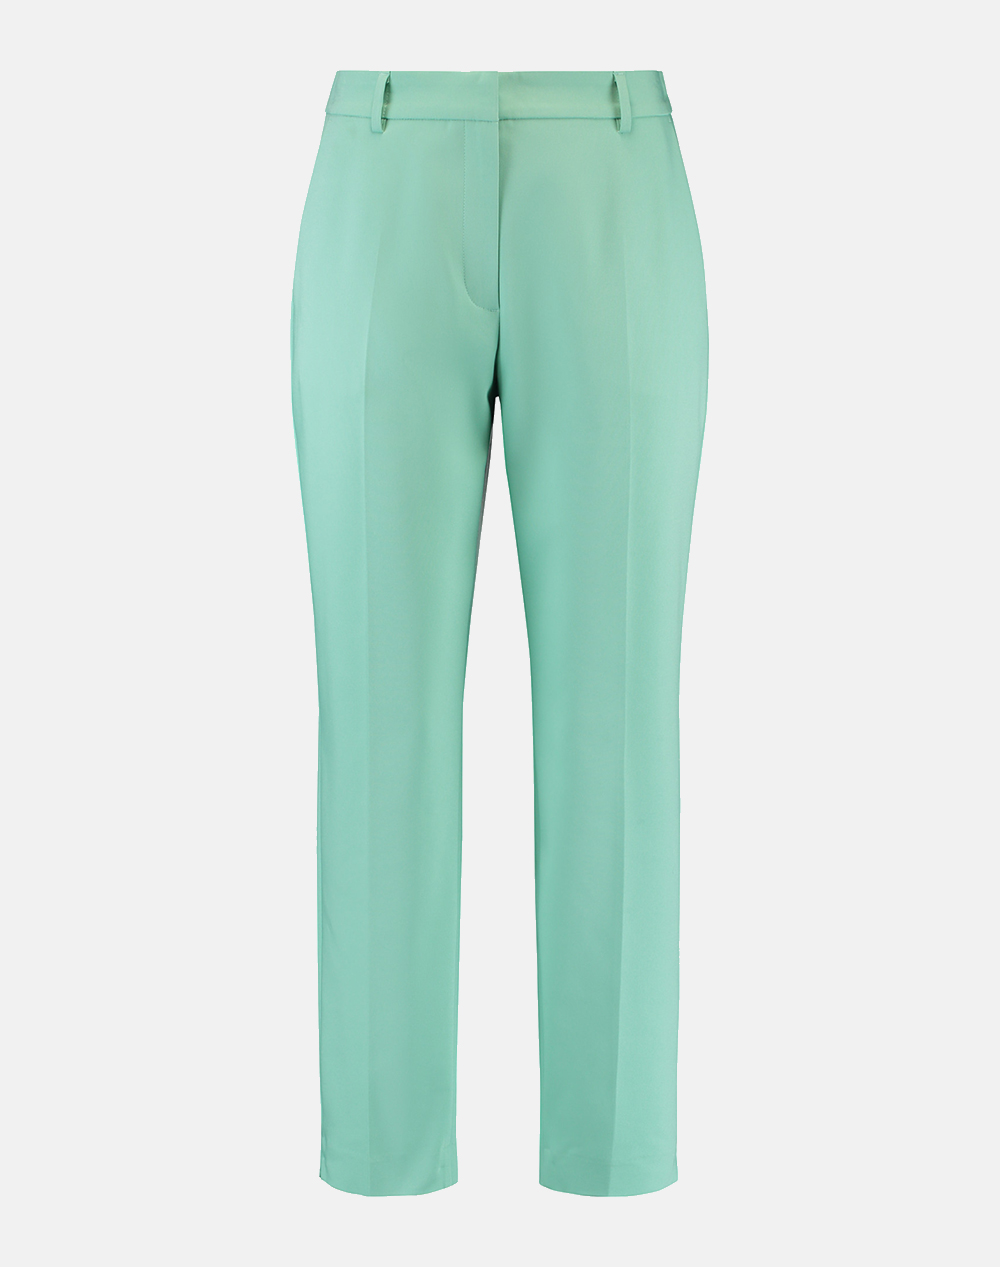 GERRY WEBER PANT LEISURE CROPPED 320006-31335-50375 MintGreen